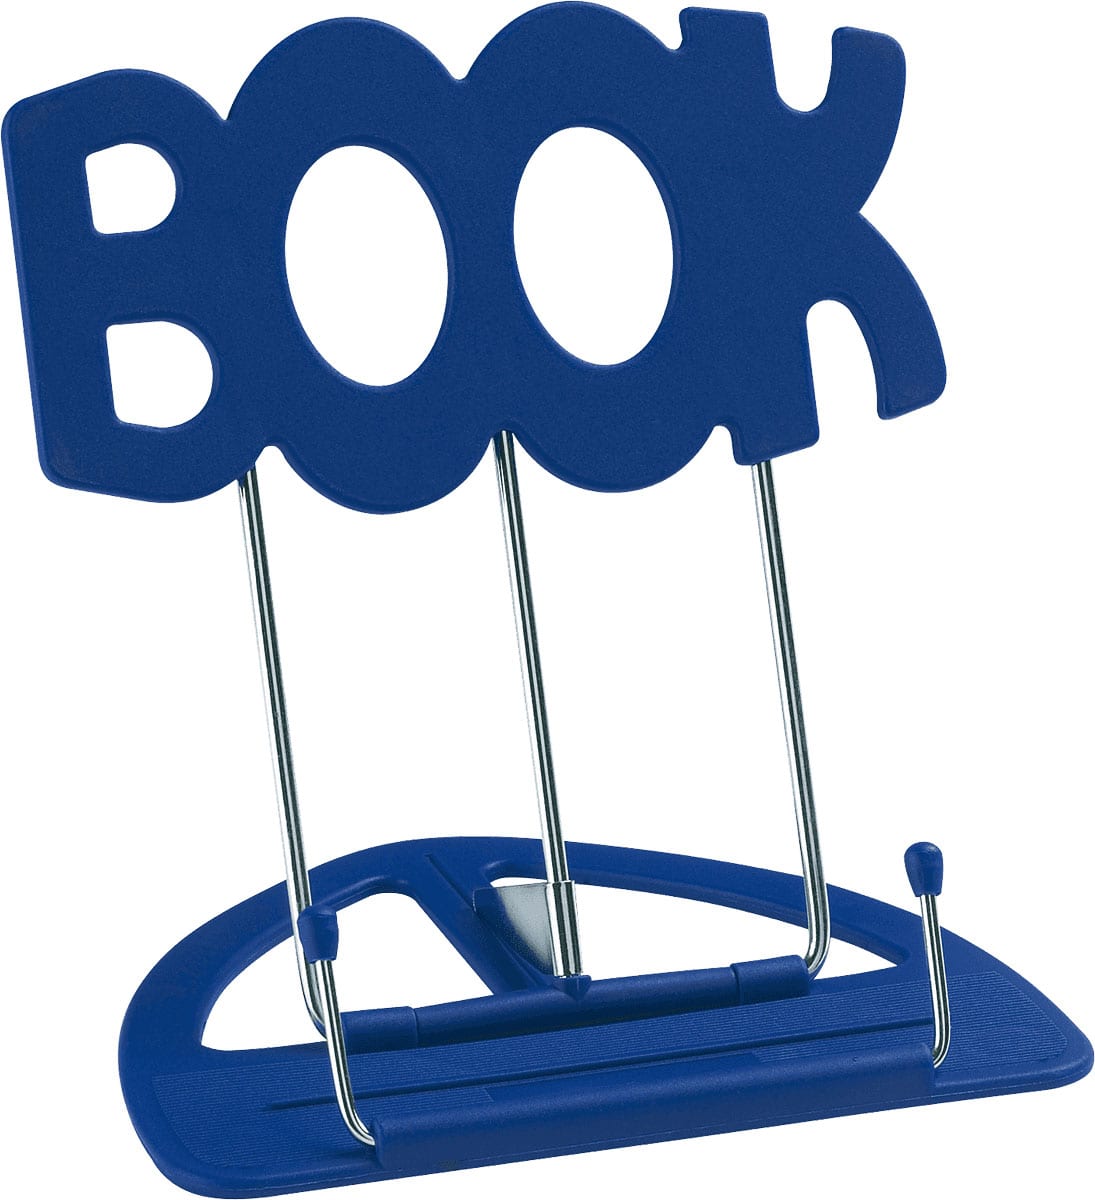 K&M PACK OF 12 BLUE MUSIC STAND BOOK